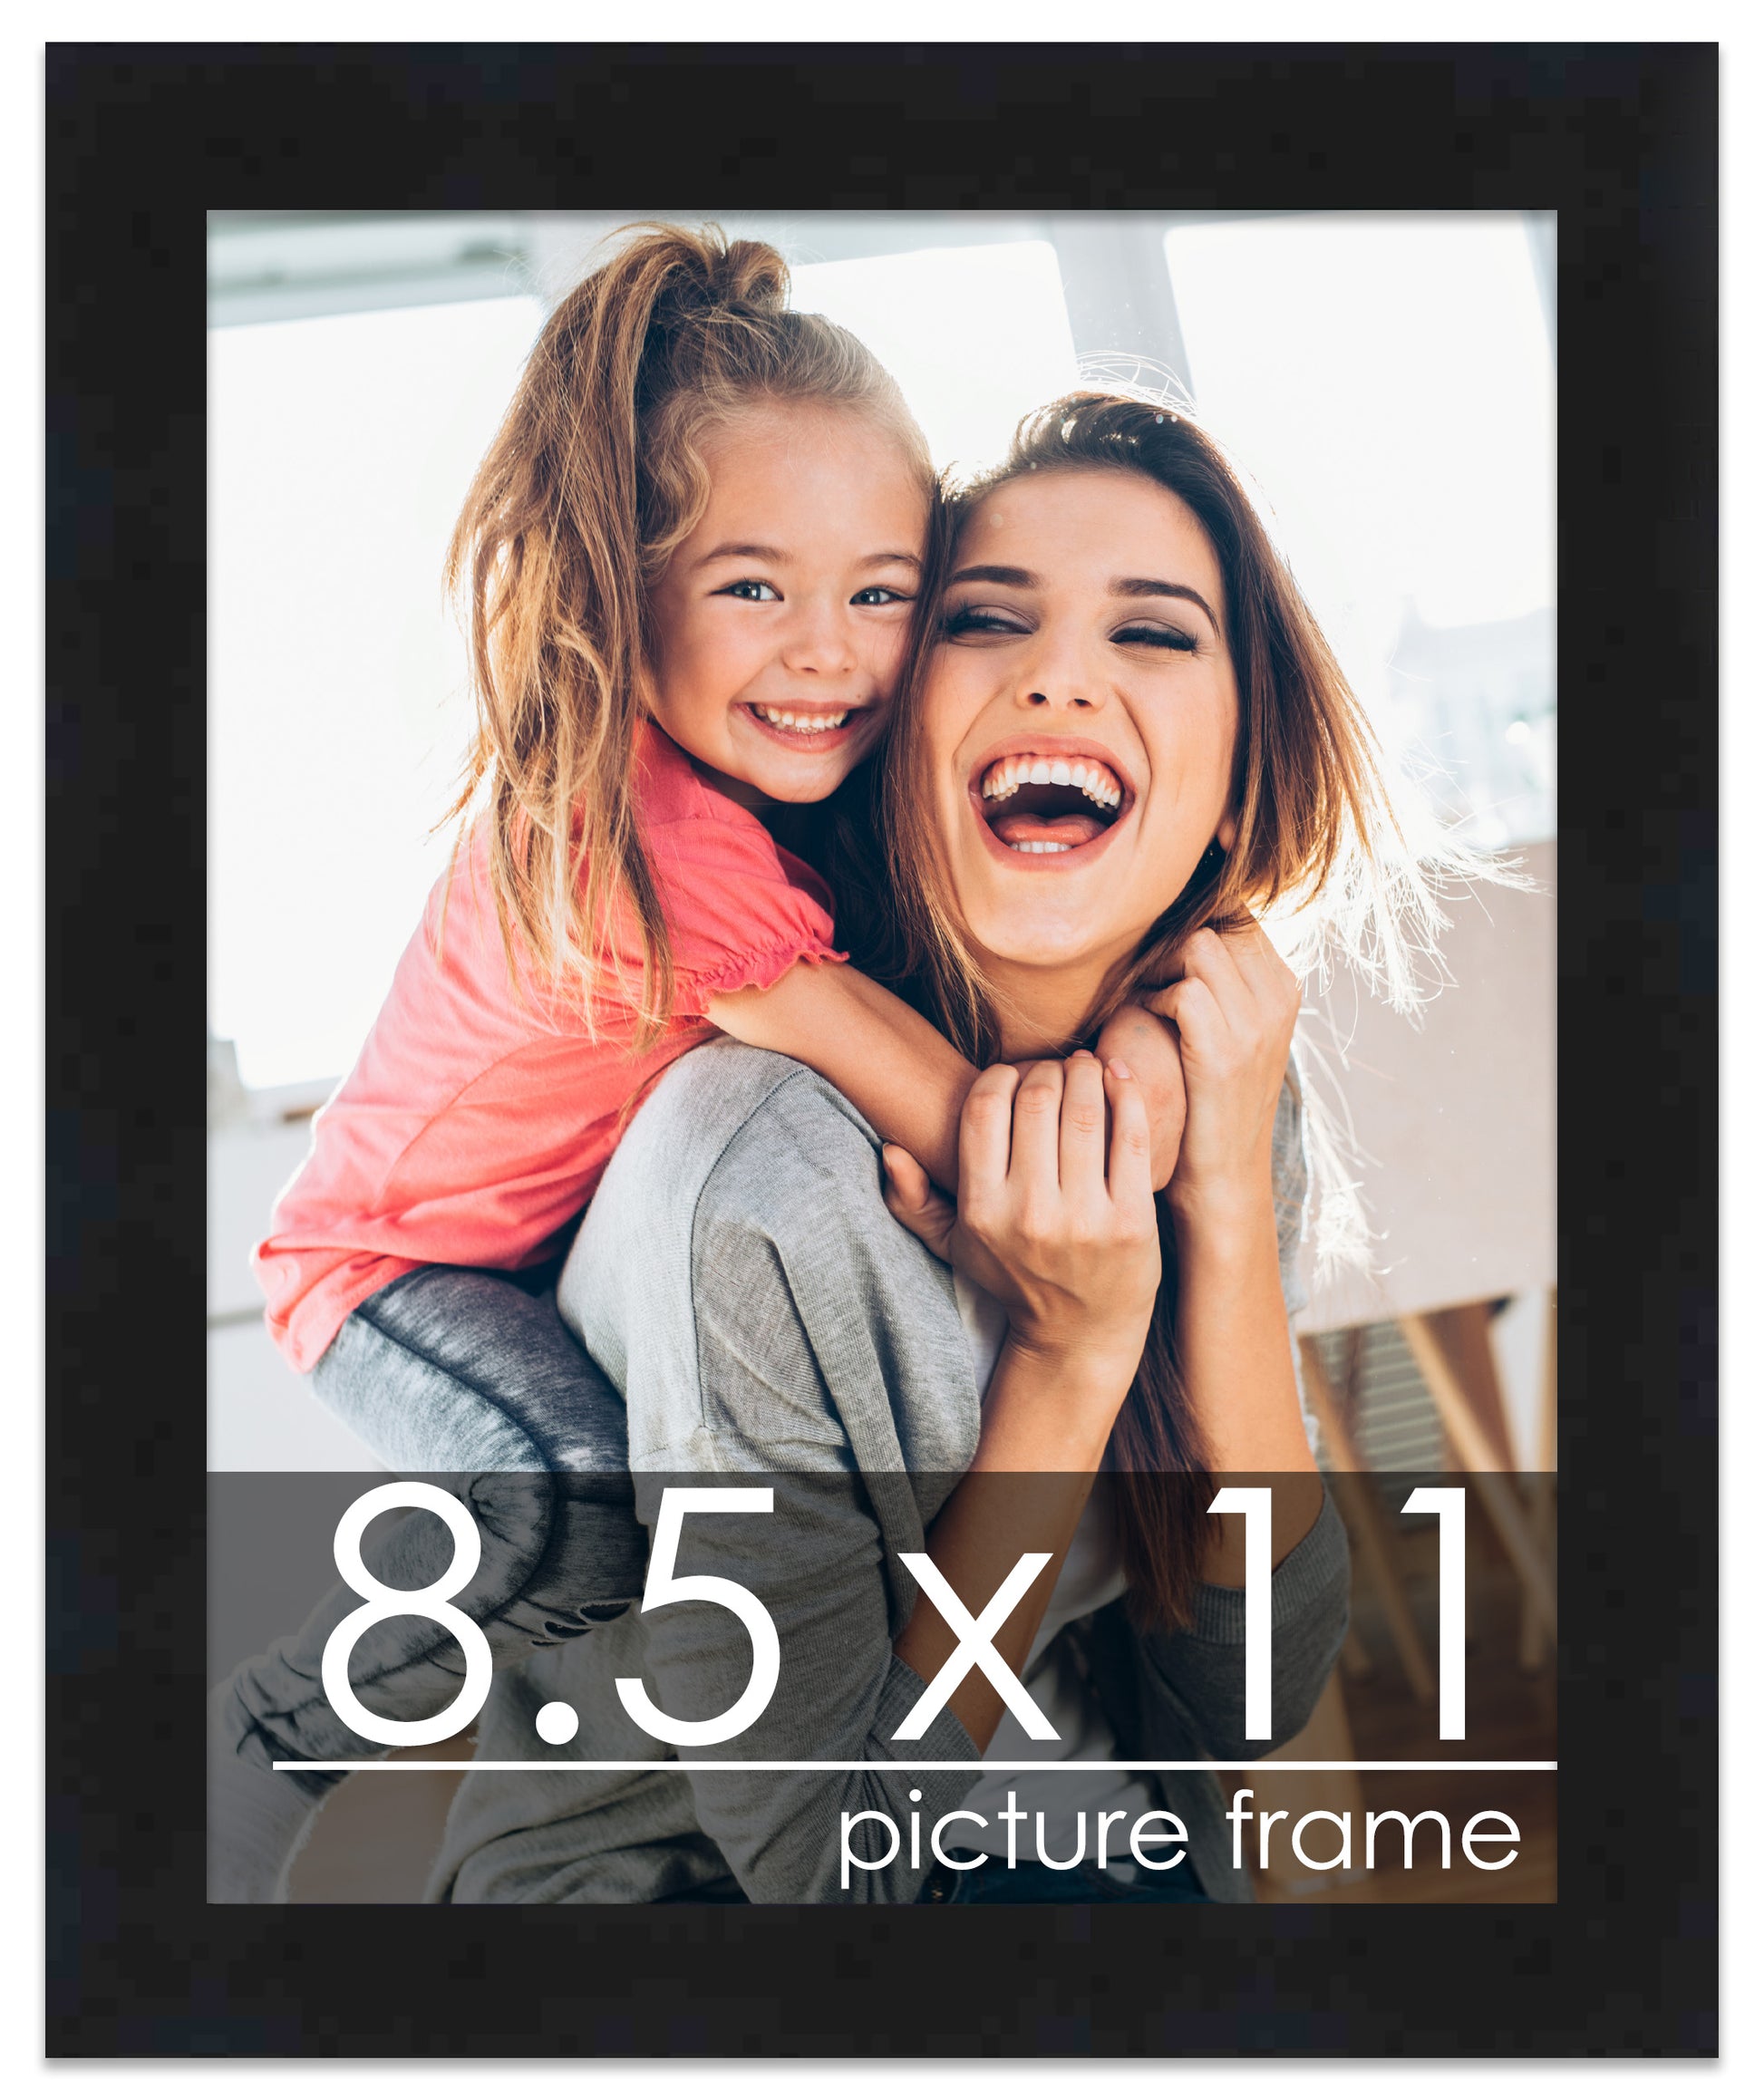 8.5x11 Picture Frame Black Solid Pine Wood 0.75 Inch Wide